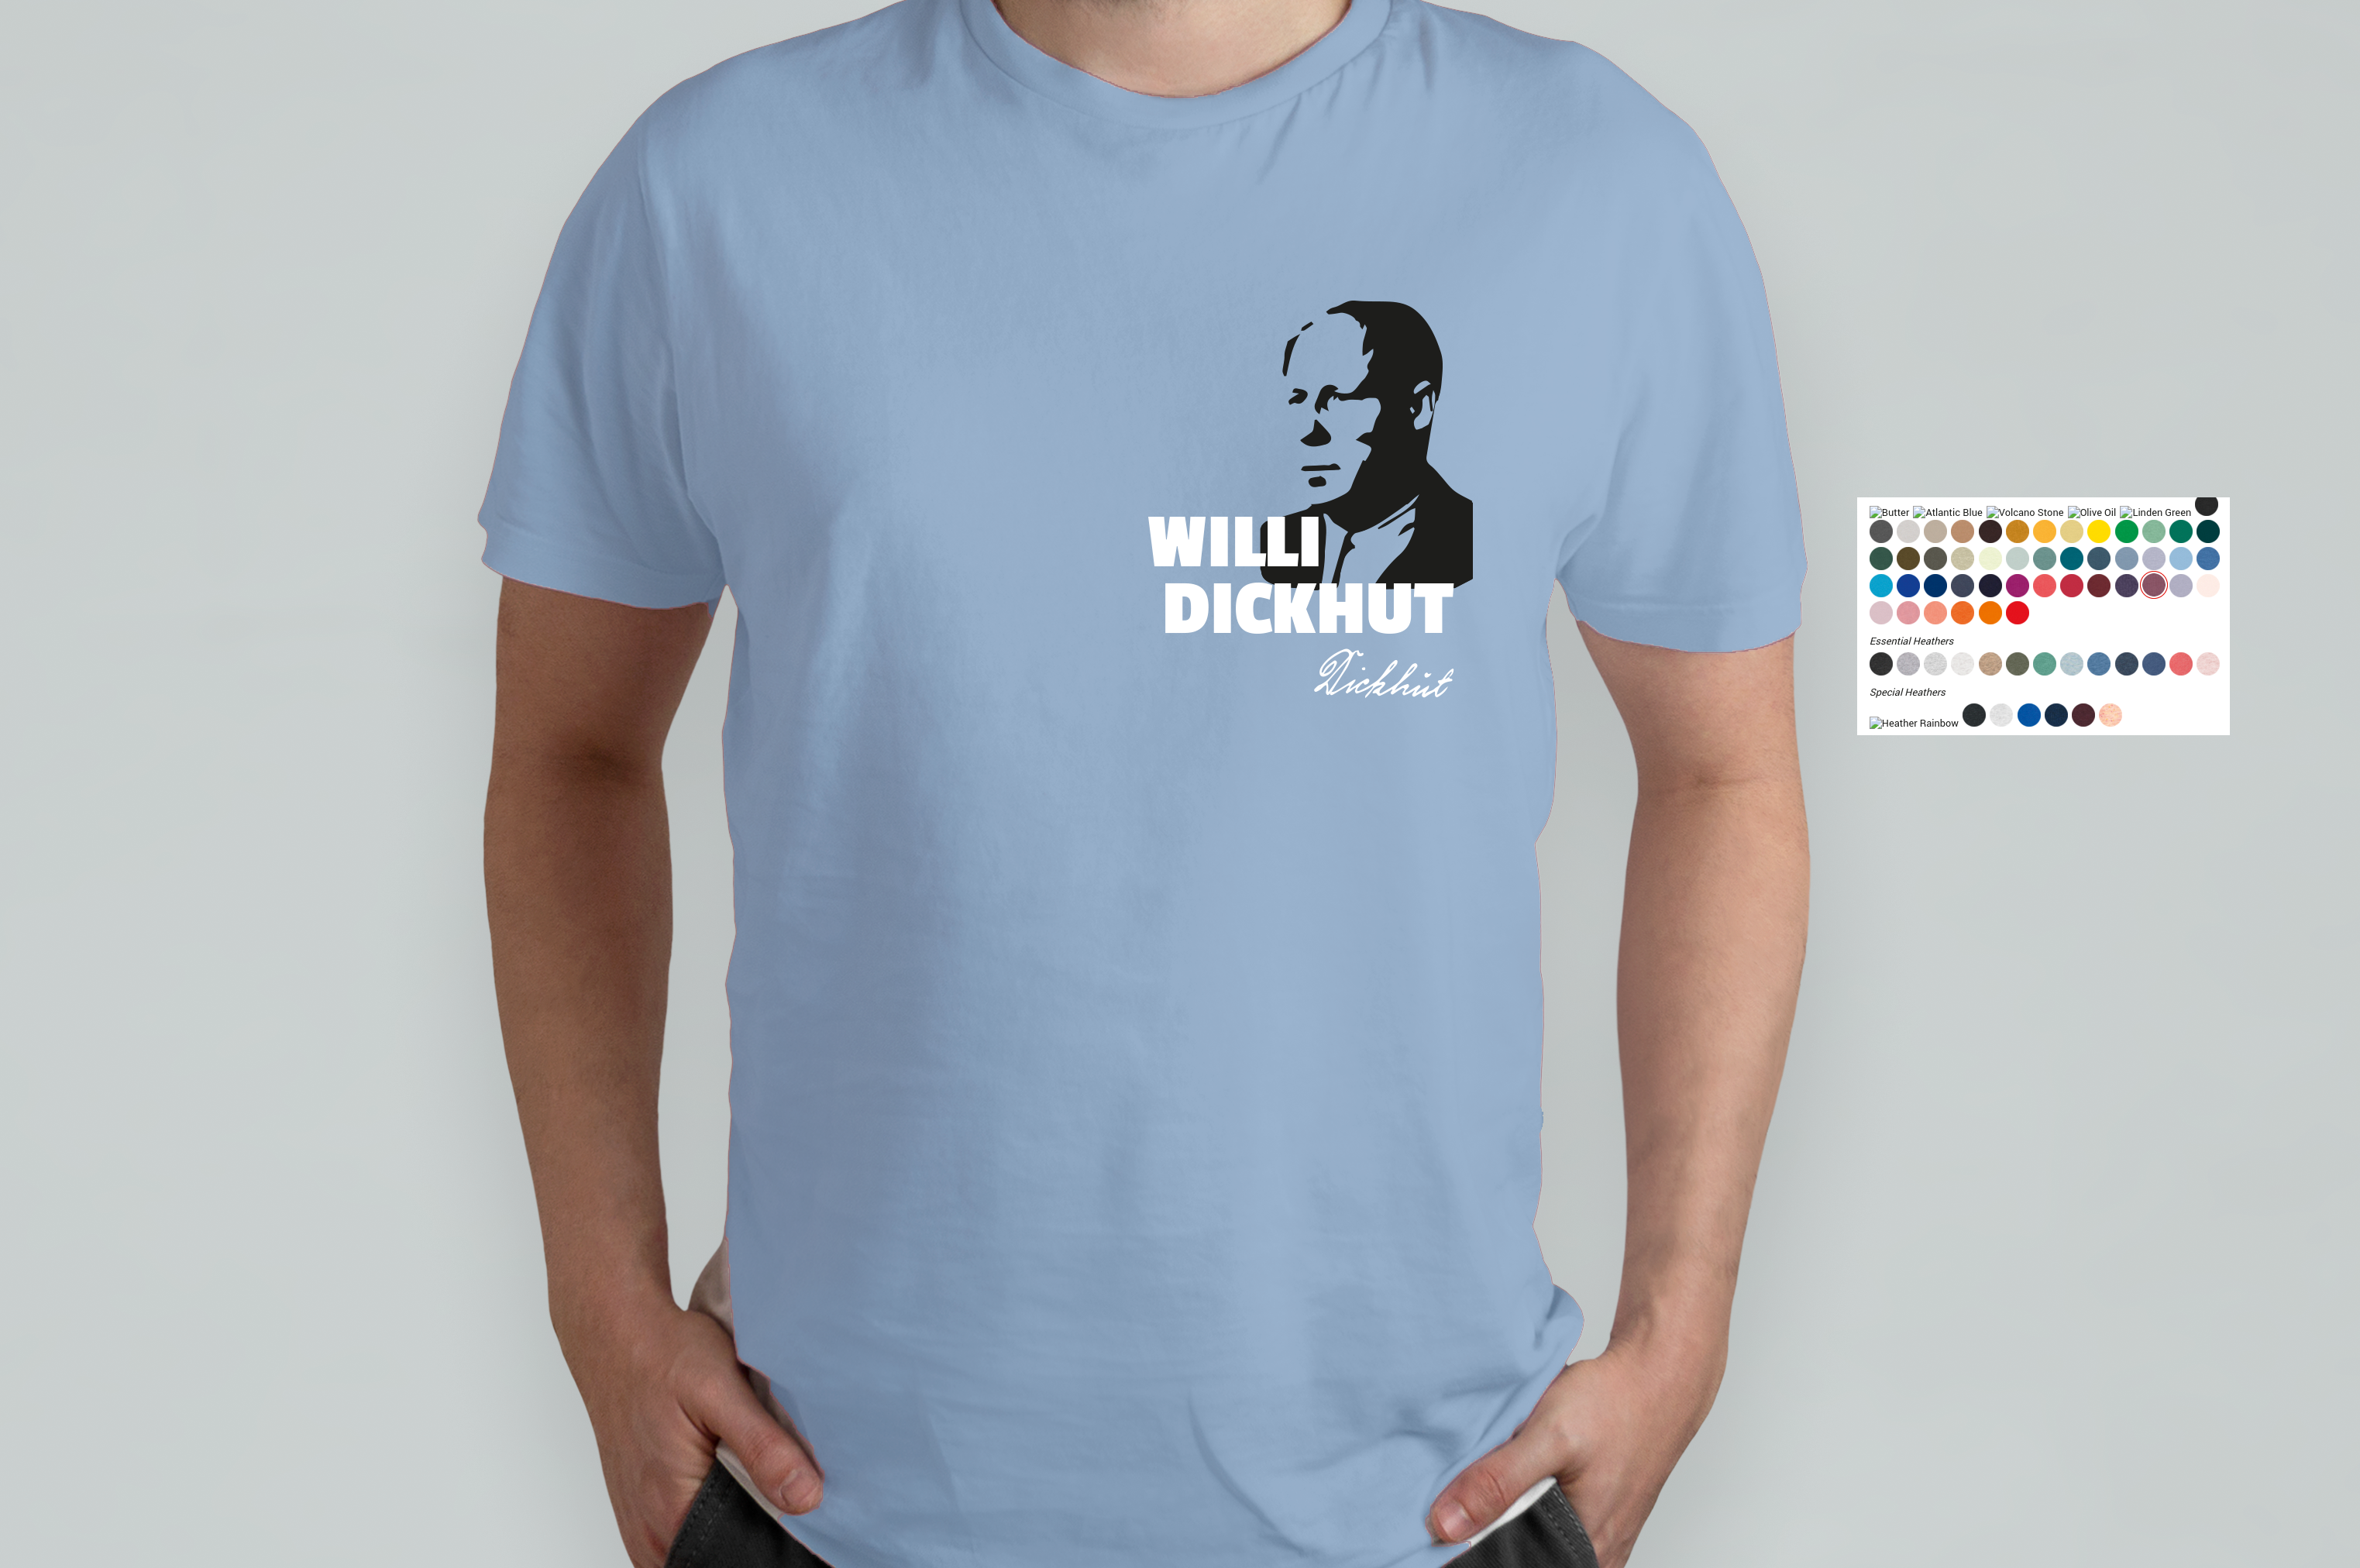 Read more about the article Willi-Dickhut-T-Shirt ab 8. Mai erhältlich